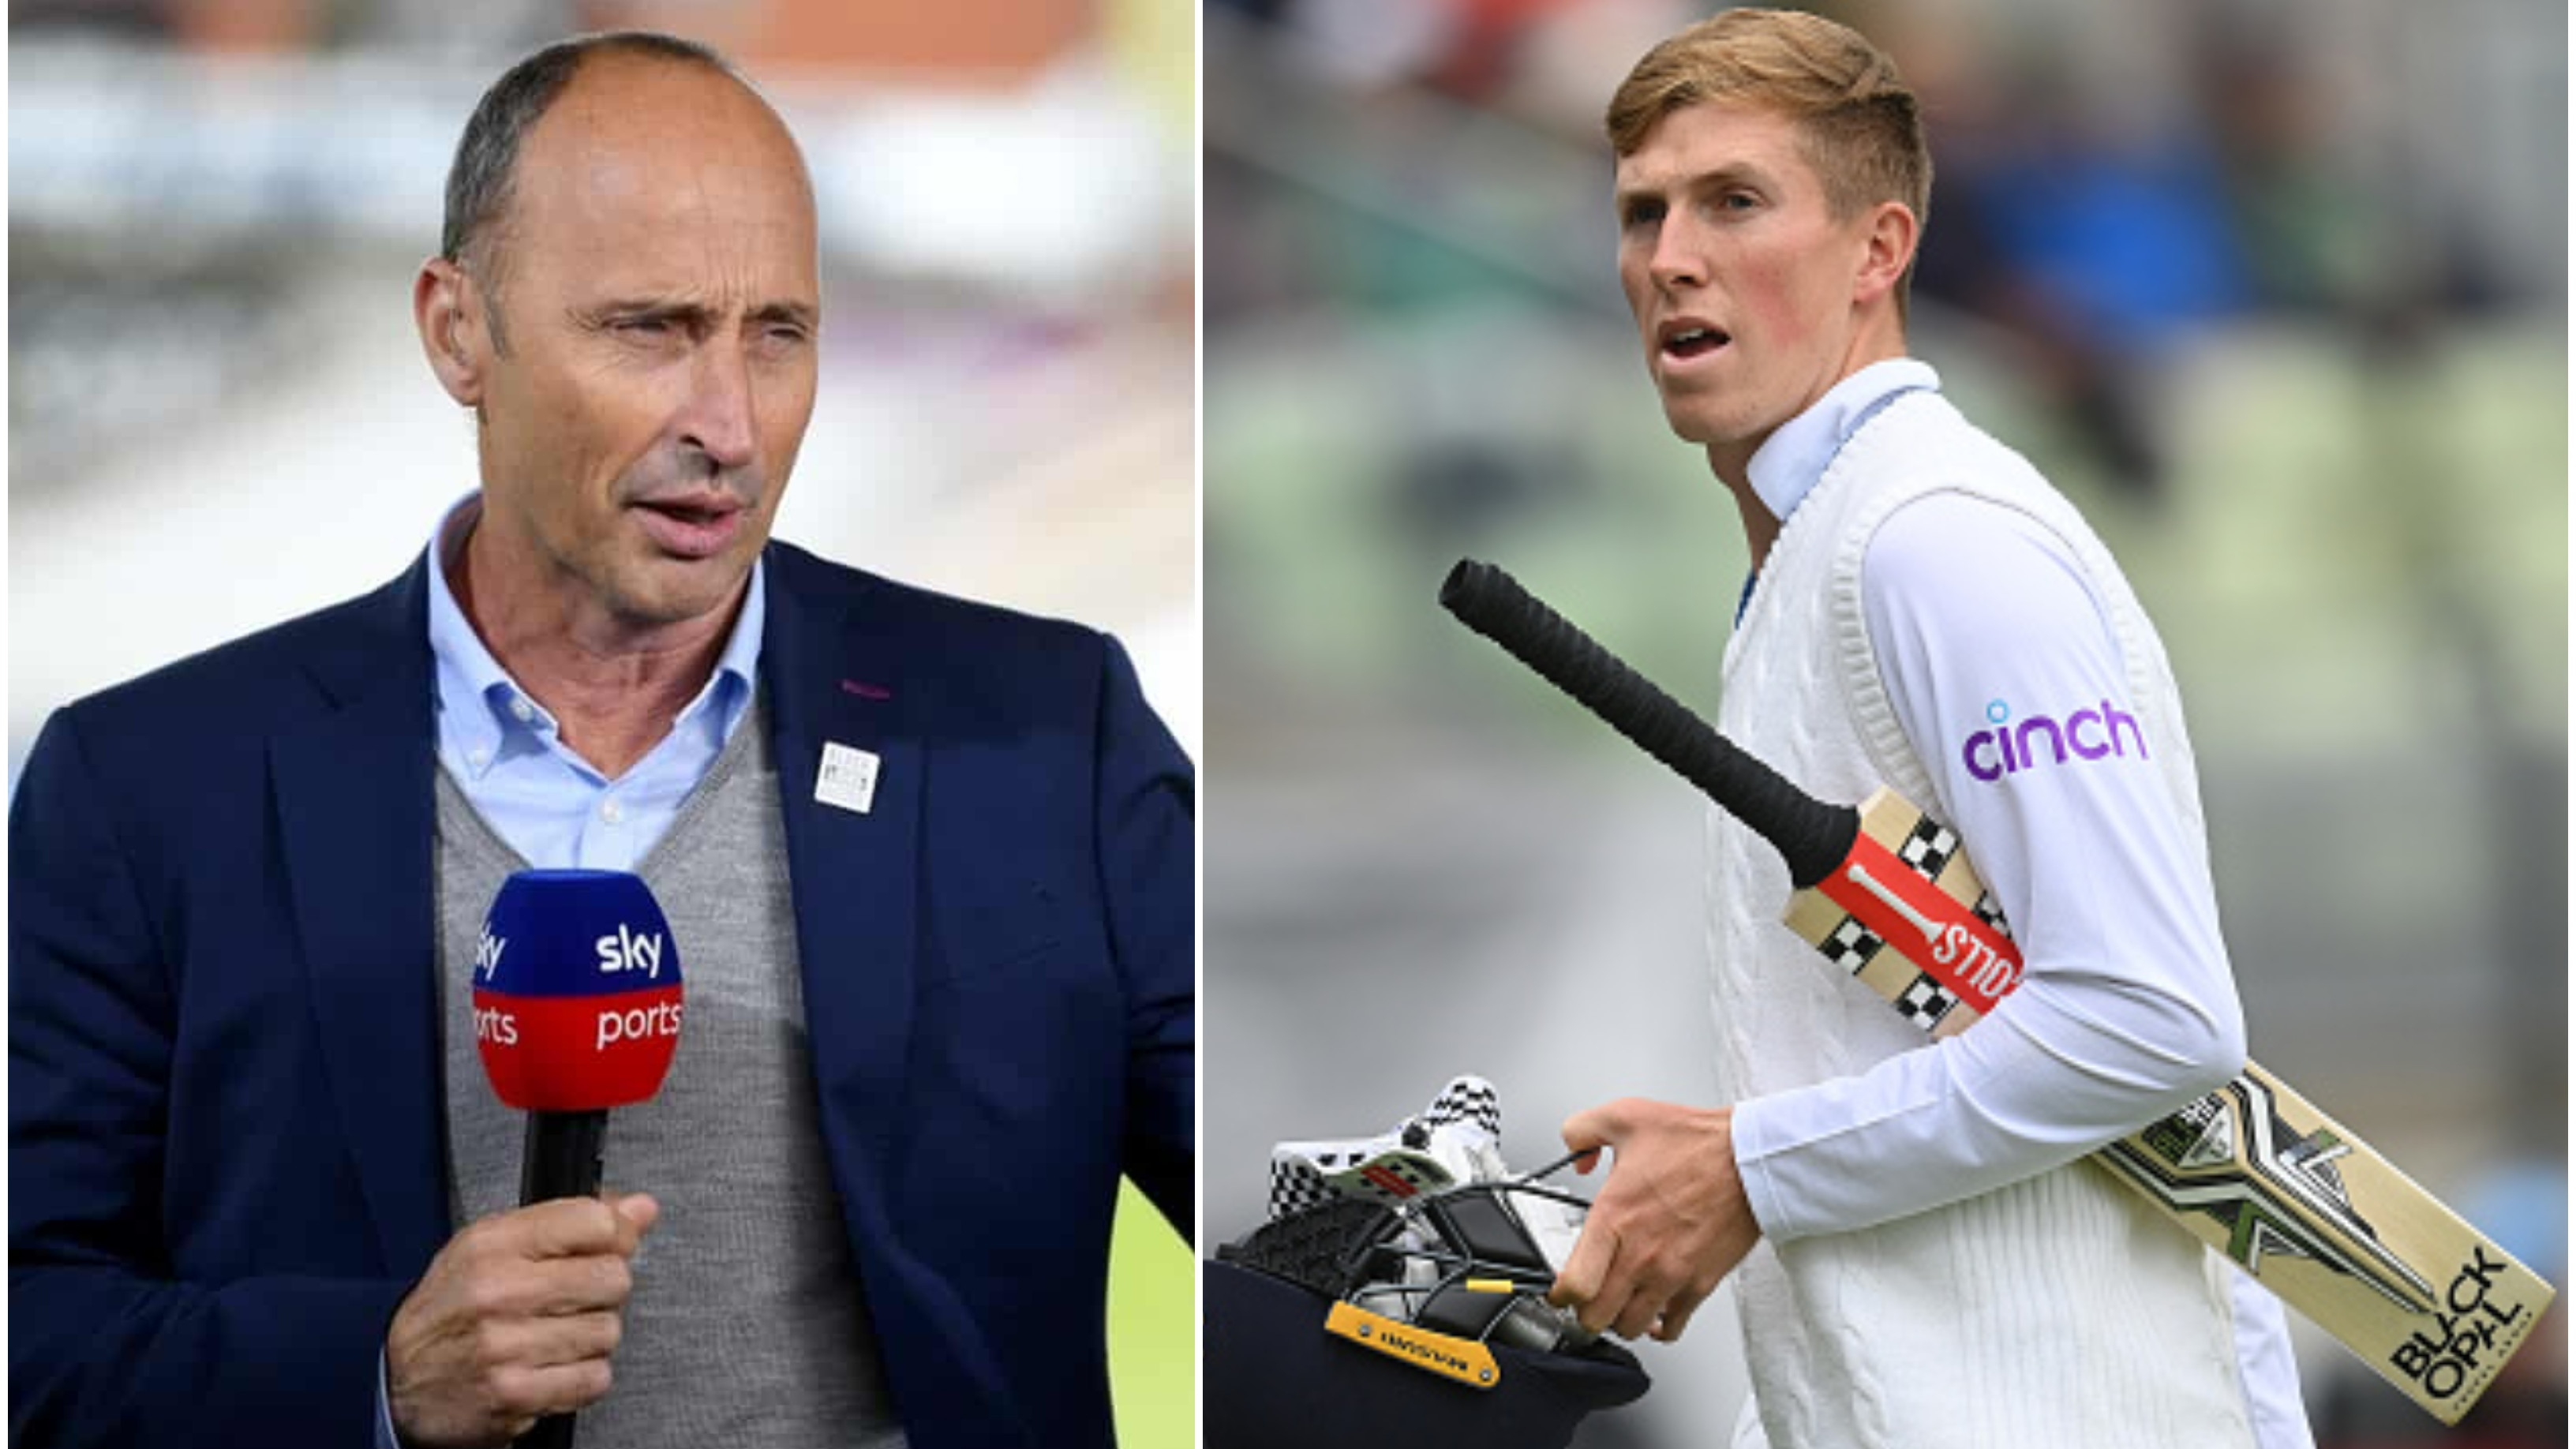 ENG v IND 2022: Nasser Hussain wants “gifted lad” Zak Crawley to make the most of his ability